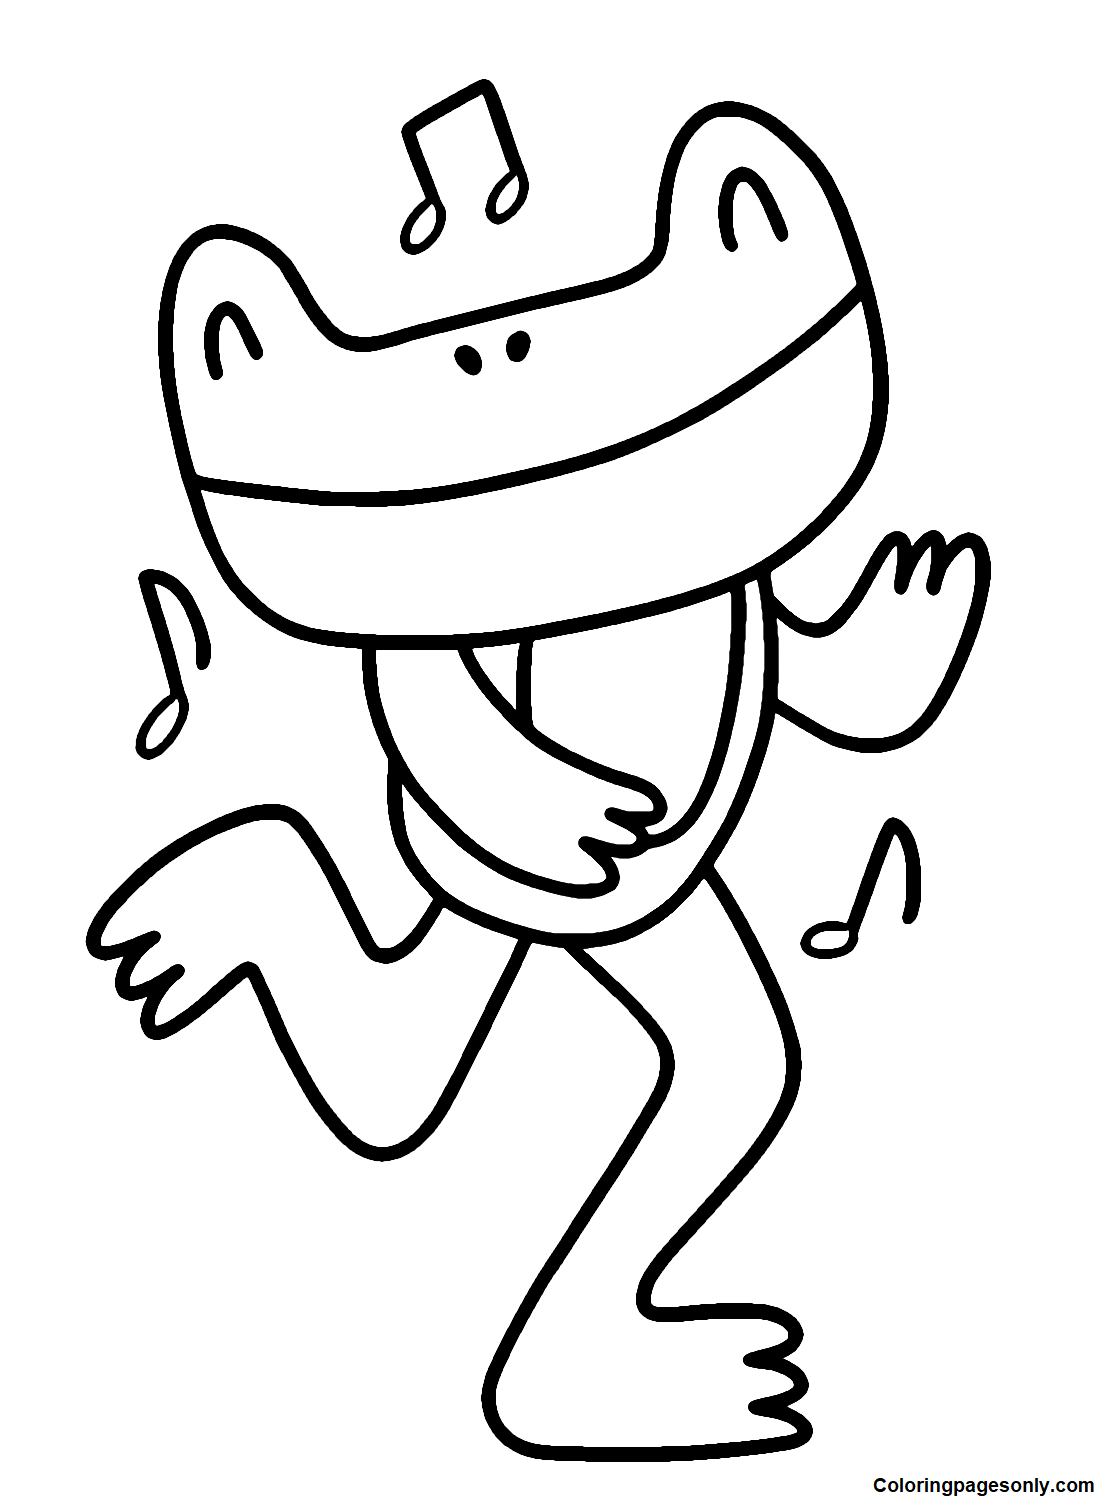 Dancing Frog Coloring Pages